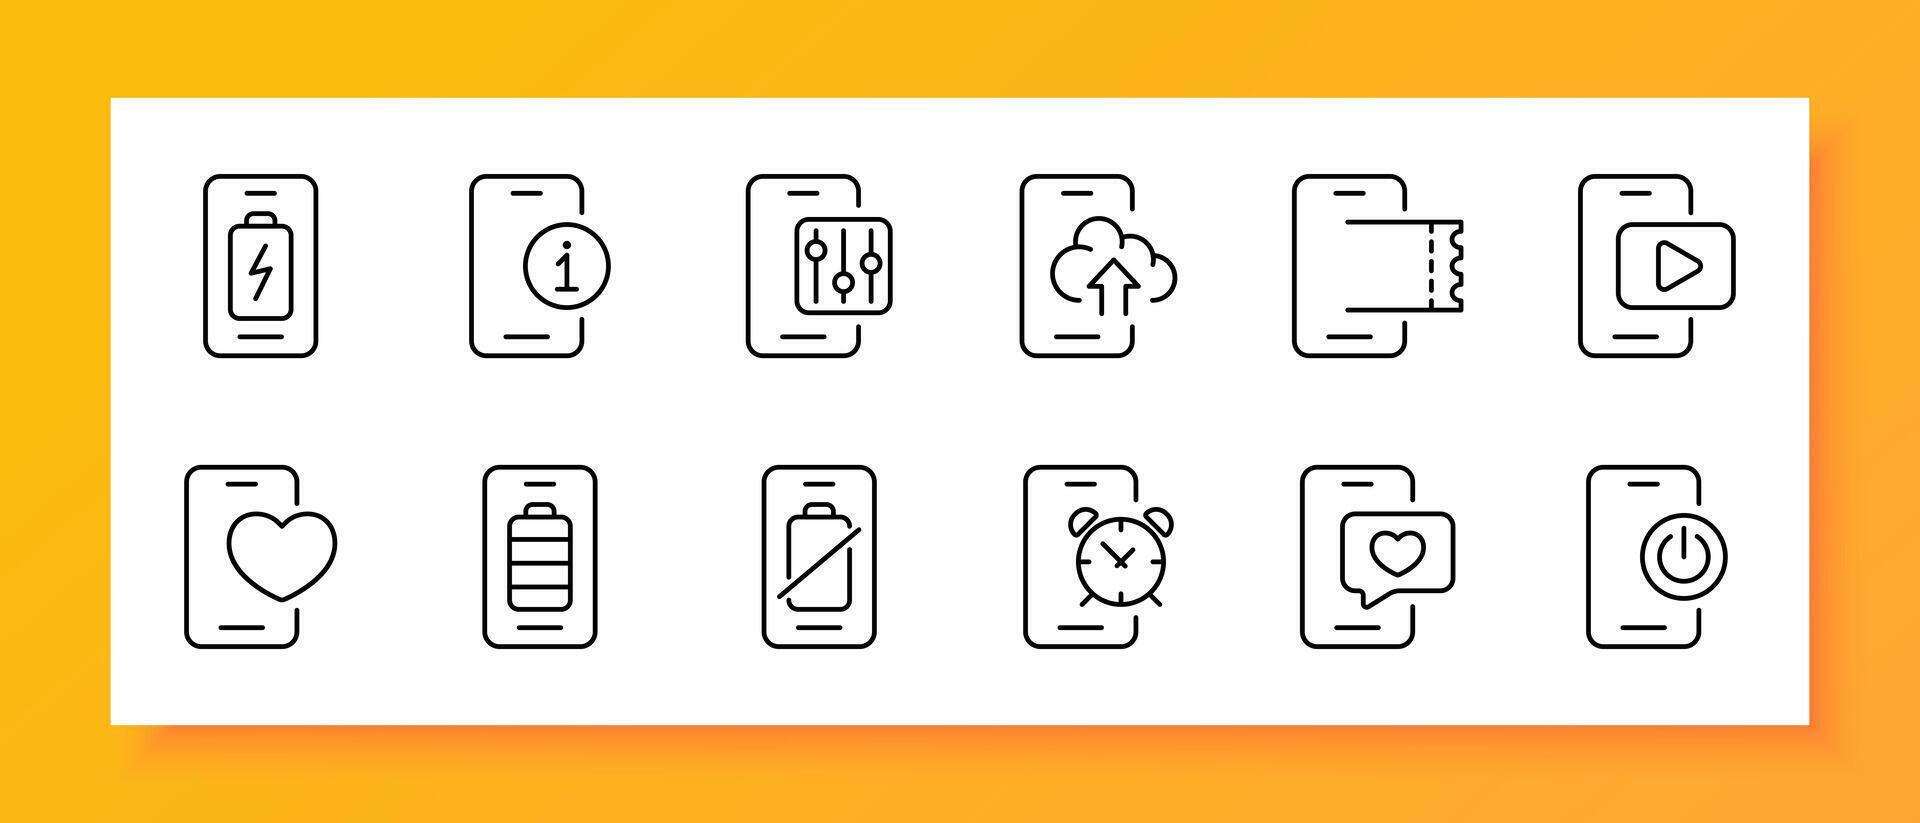 Smartphone icon set. Application, battery, information, settings, cloud storage, clock, notification, dating site. Black icon on a white background. Vector line icon for business and advertising